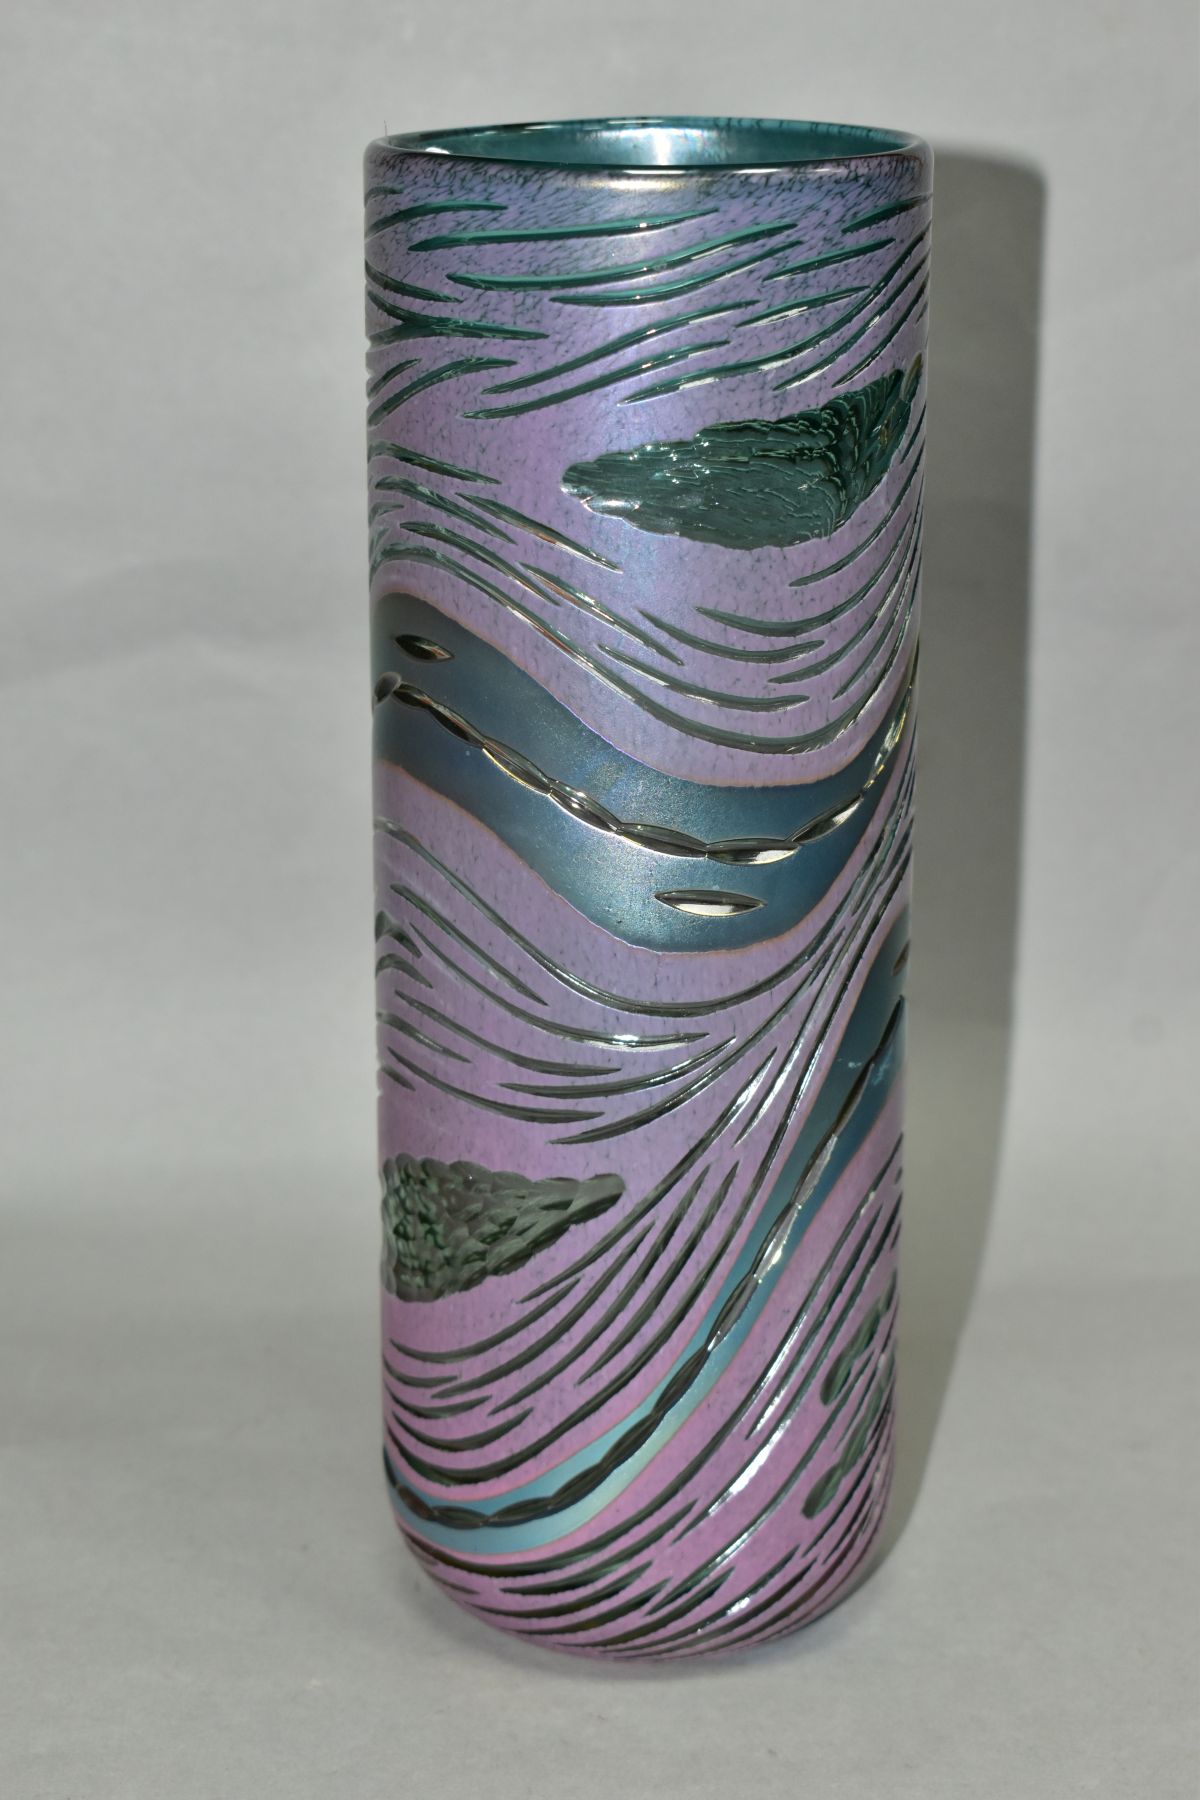 RICHARD GOLDING FOR OKRA GLASS, a cylindrical purple/blue iridescent vase with a textured surface, - Image 3 of 6